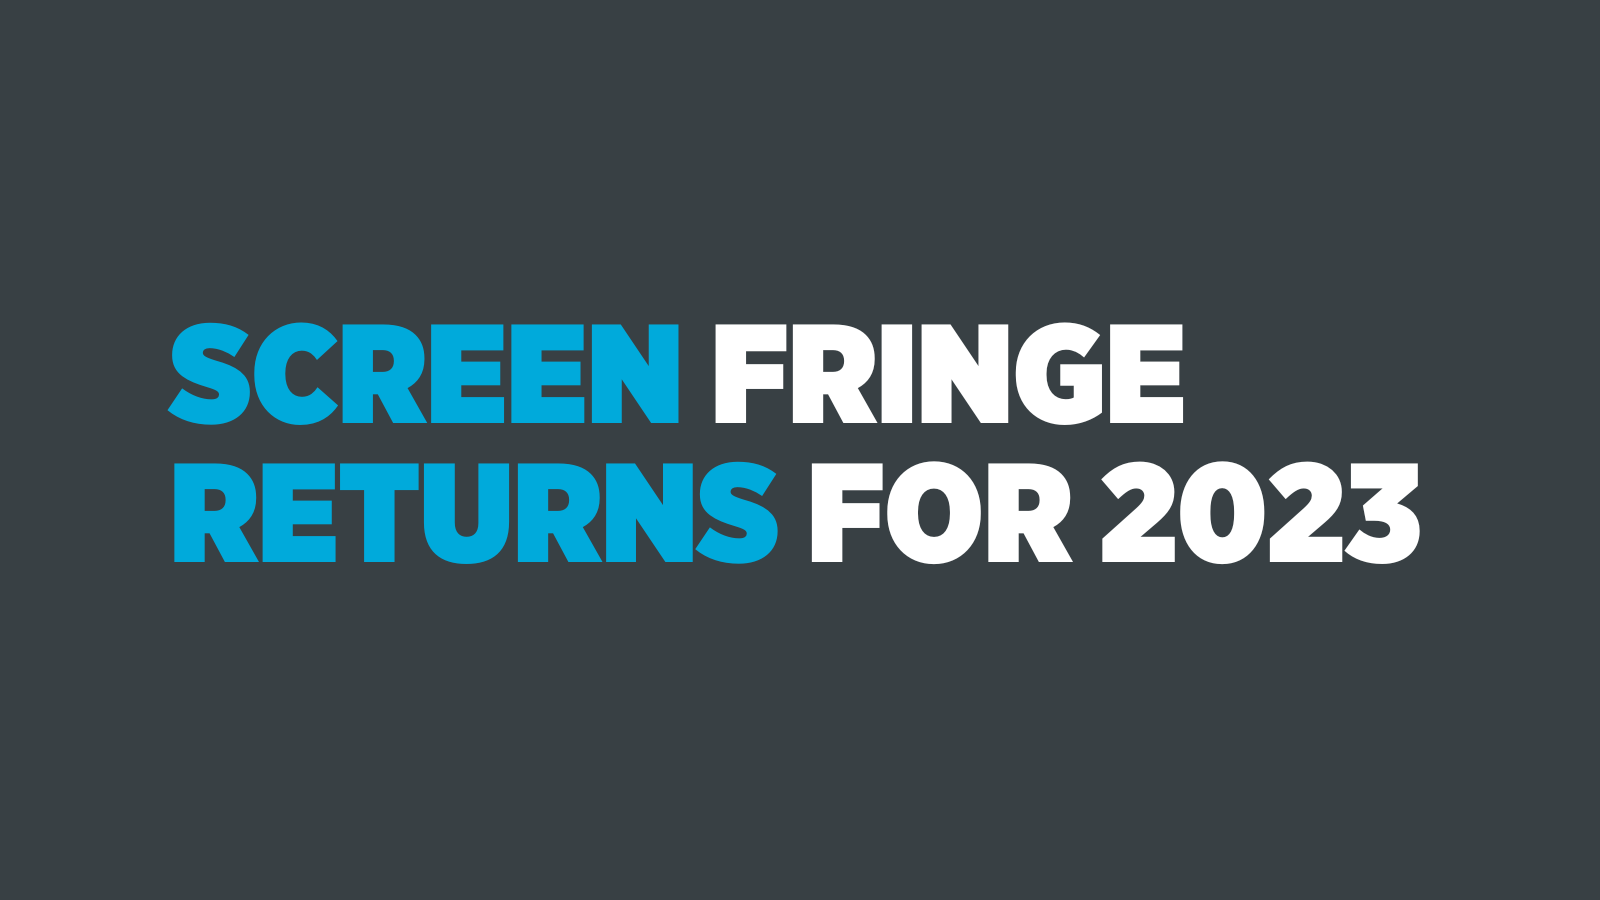 The words Screen Fringe returns for 2023 are written in bold capital letters over a grey background